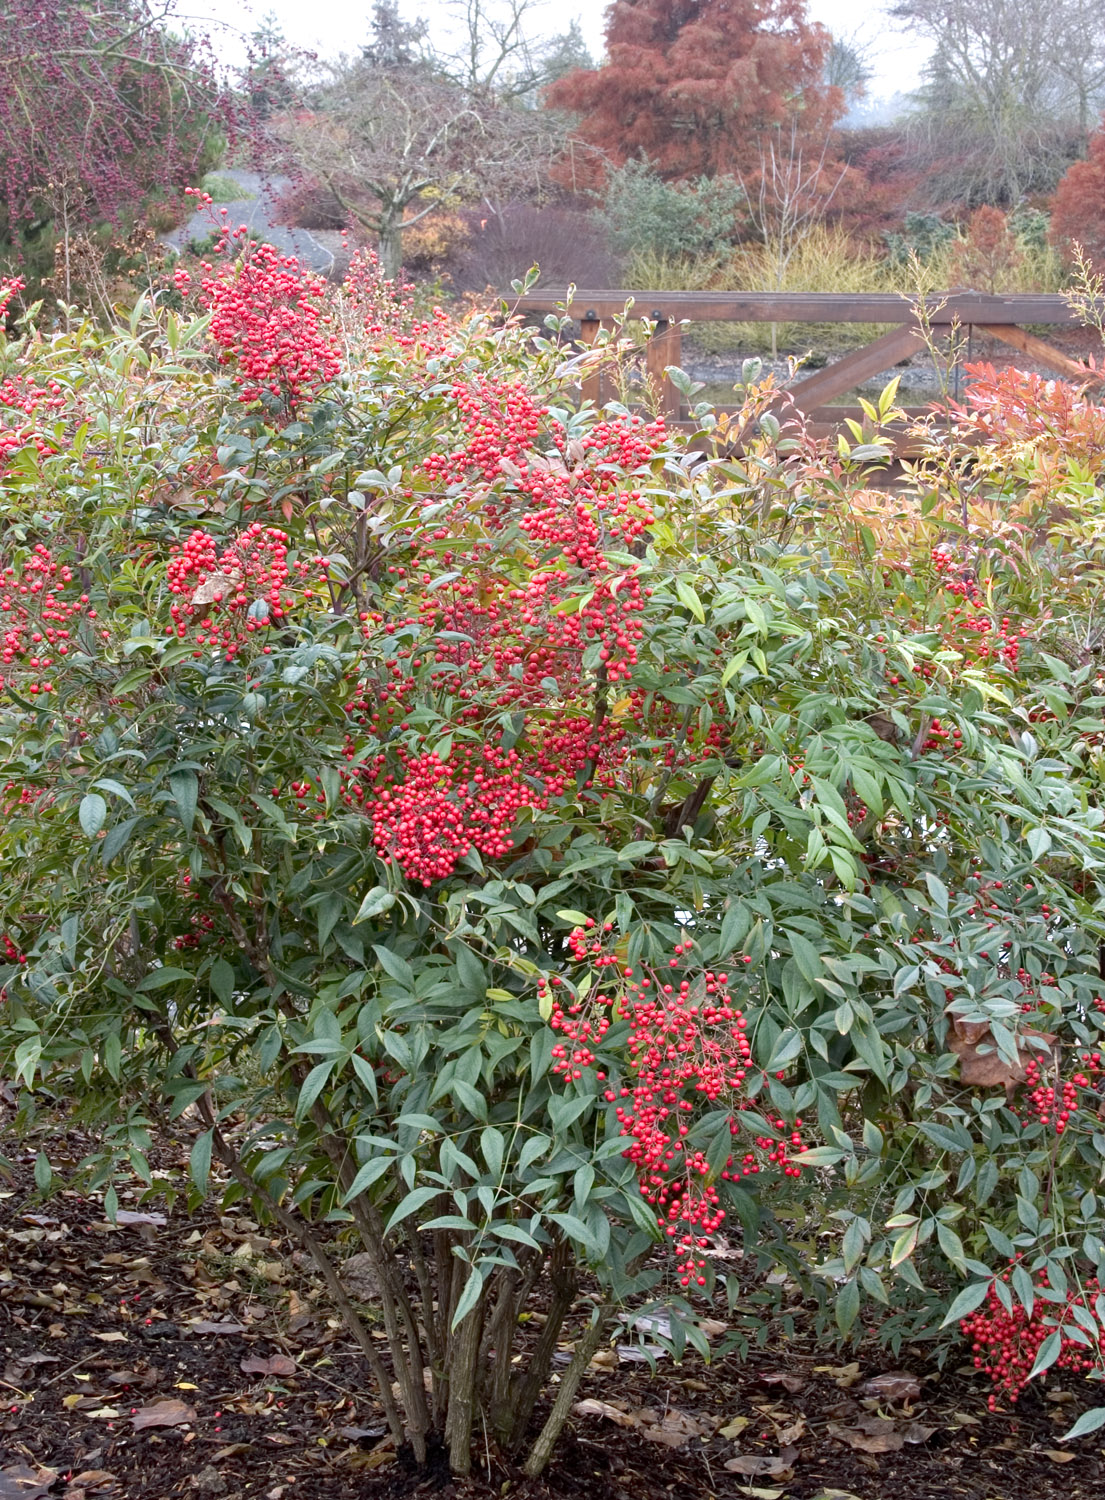 Landscaping with invasive species such as this Nandina shrub disrupts native habitat. Use native species when designing your garden.